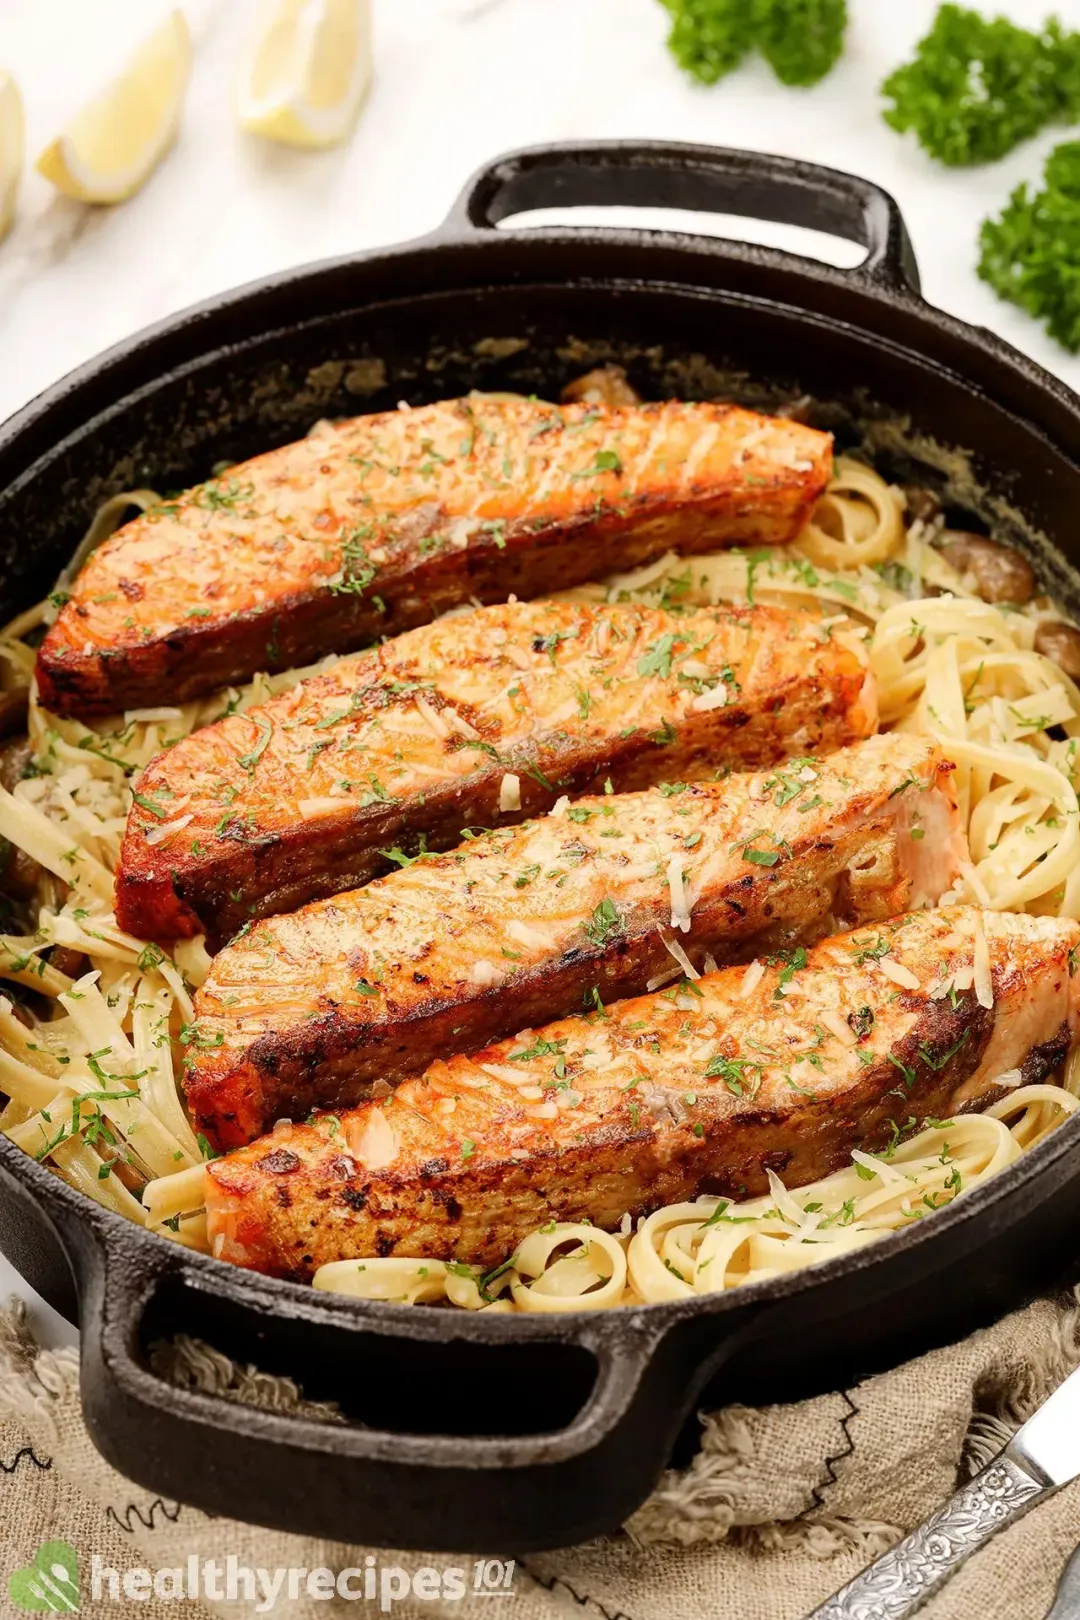 A skillet containing four bright orange cooked salmon fillets sprinkled with chopped parsley laid on a bed of fettuccine